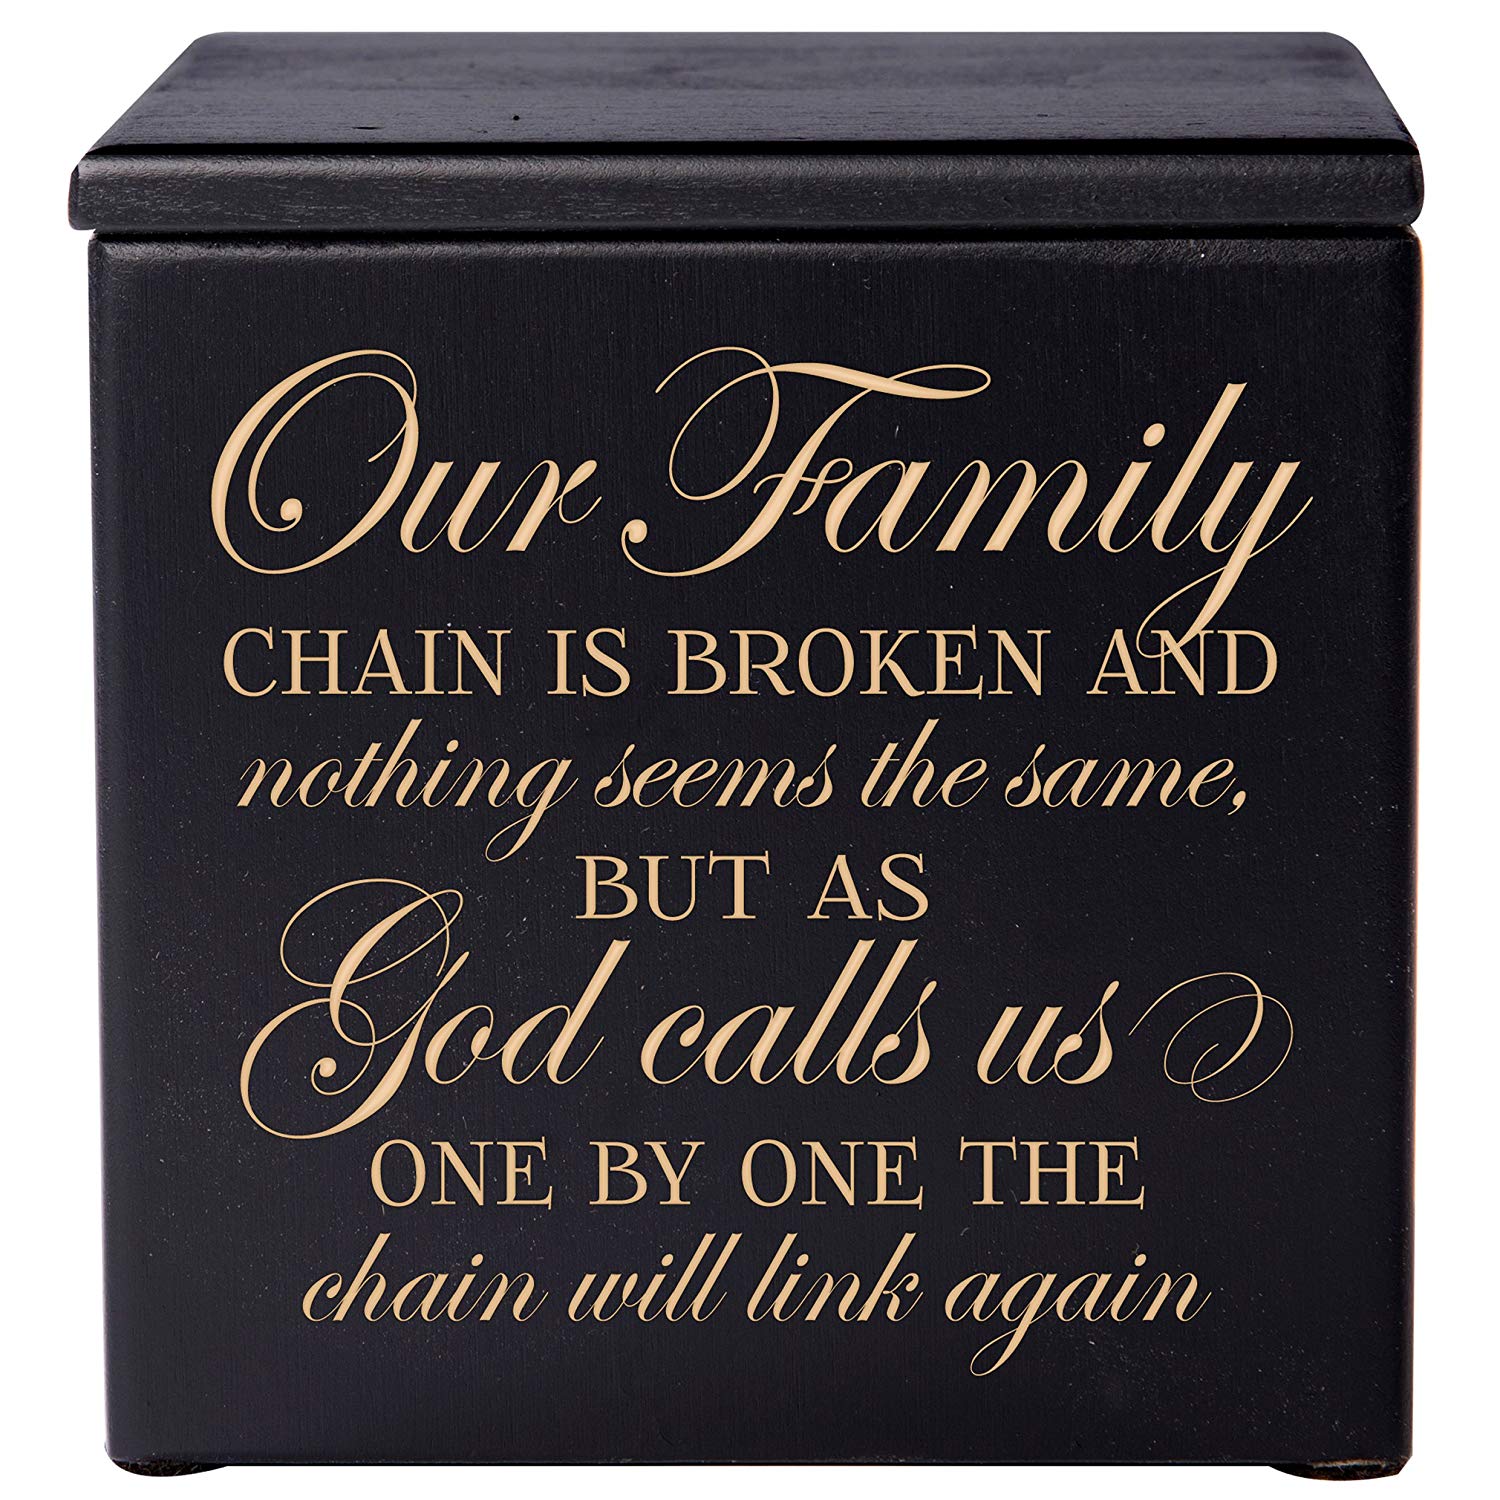 Wooden Memorial Cremation Urn Box of Human Ashes